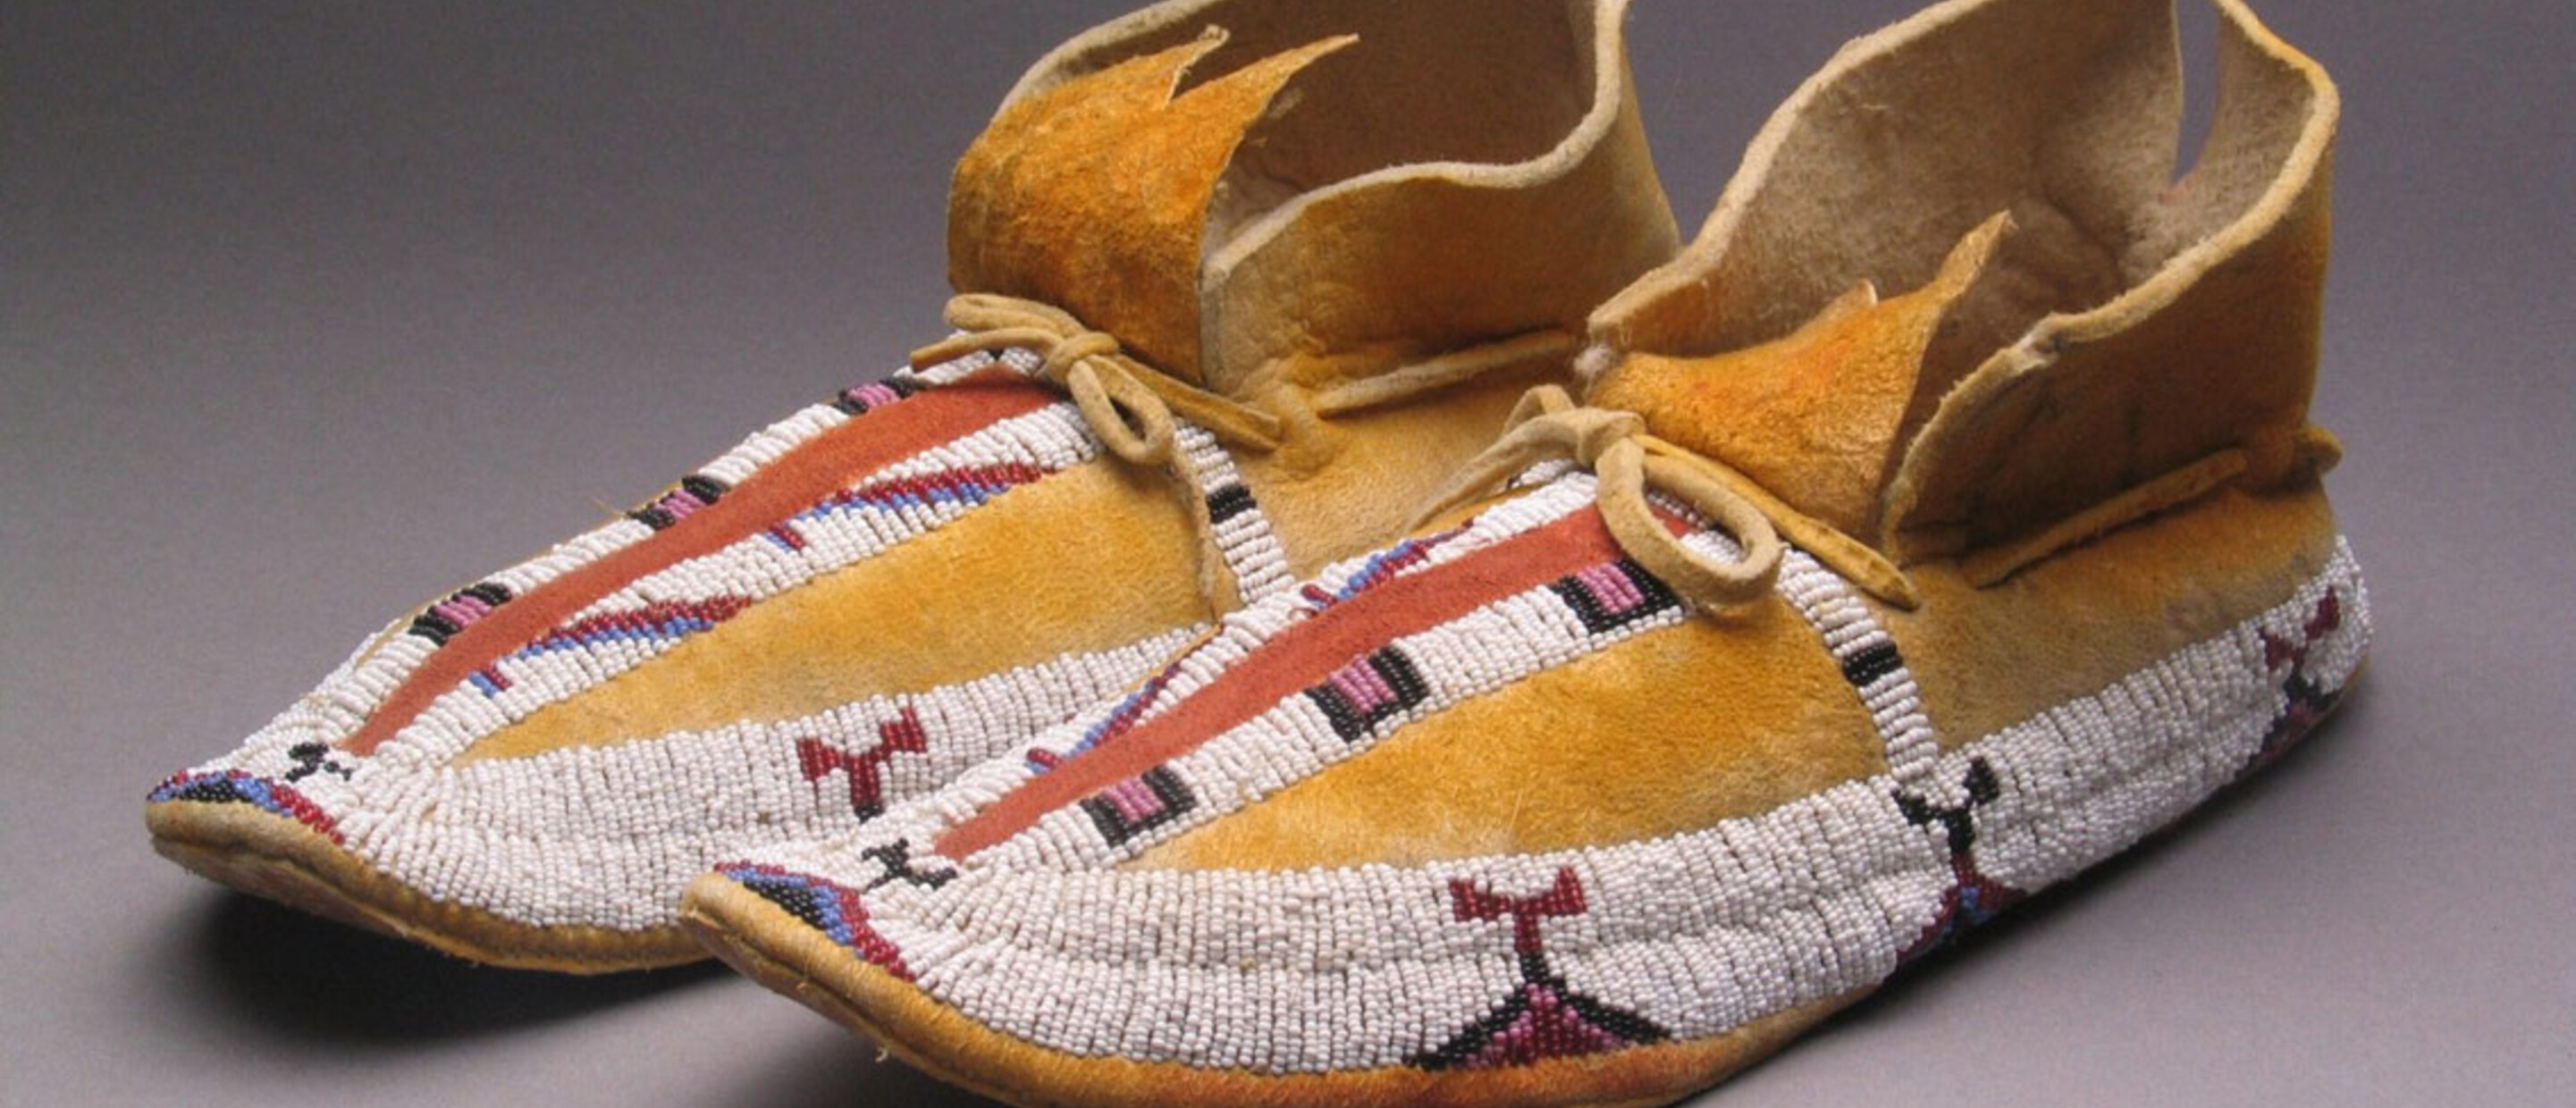 Unknown Arapaho or another South Plains Tribe, Moccasins, c. 1910 